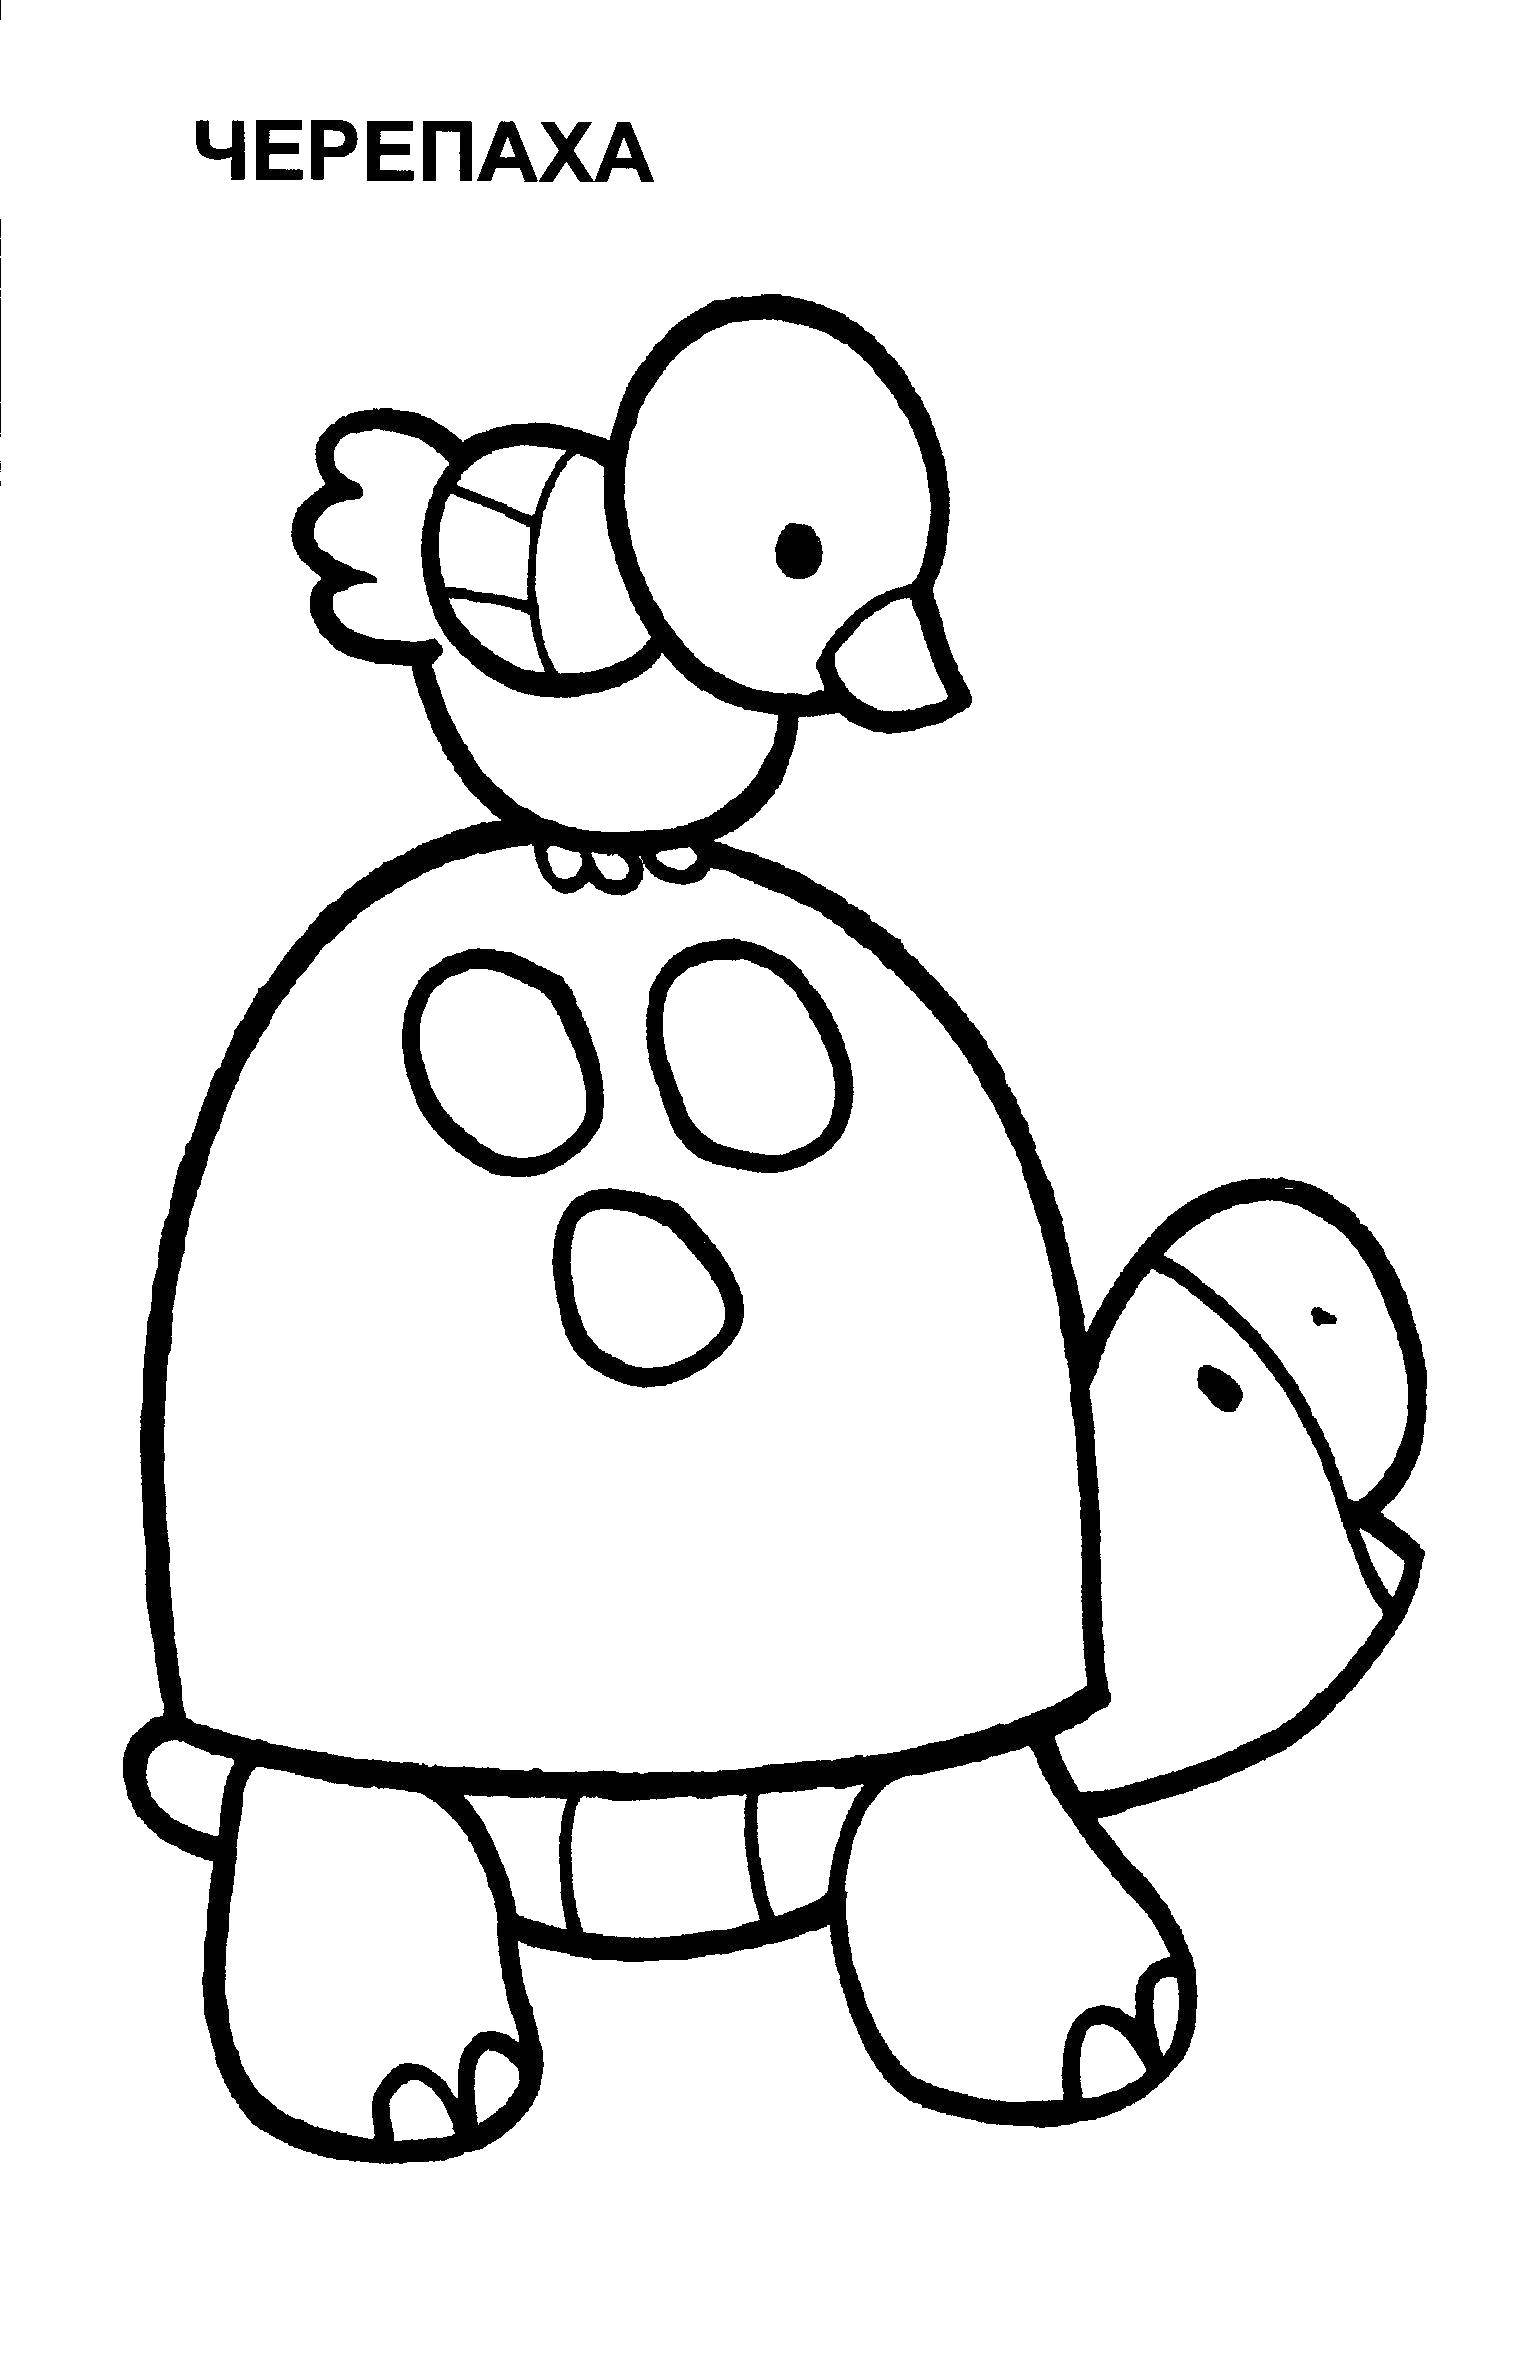 Coloring The tortoise and the bird. Category Coloring pages for kids. Tags:  turtle.